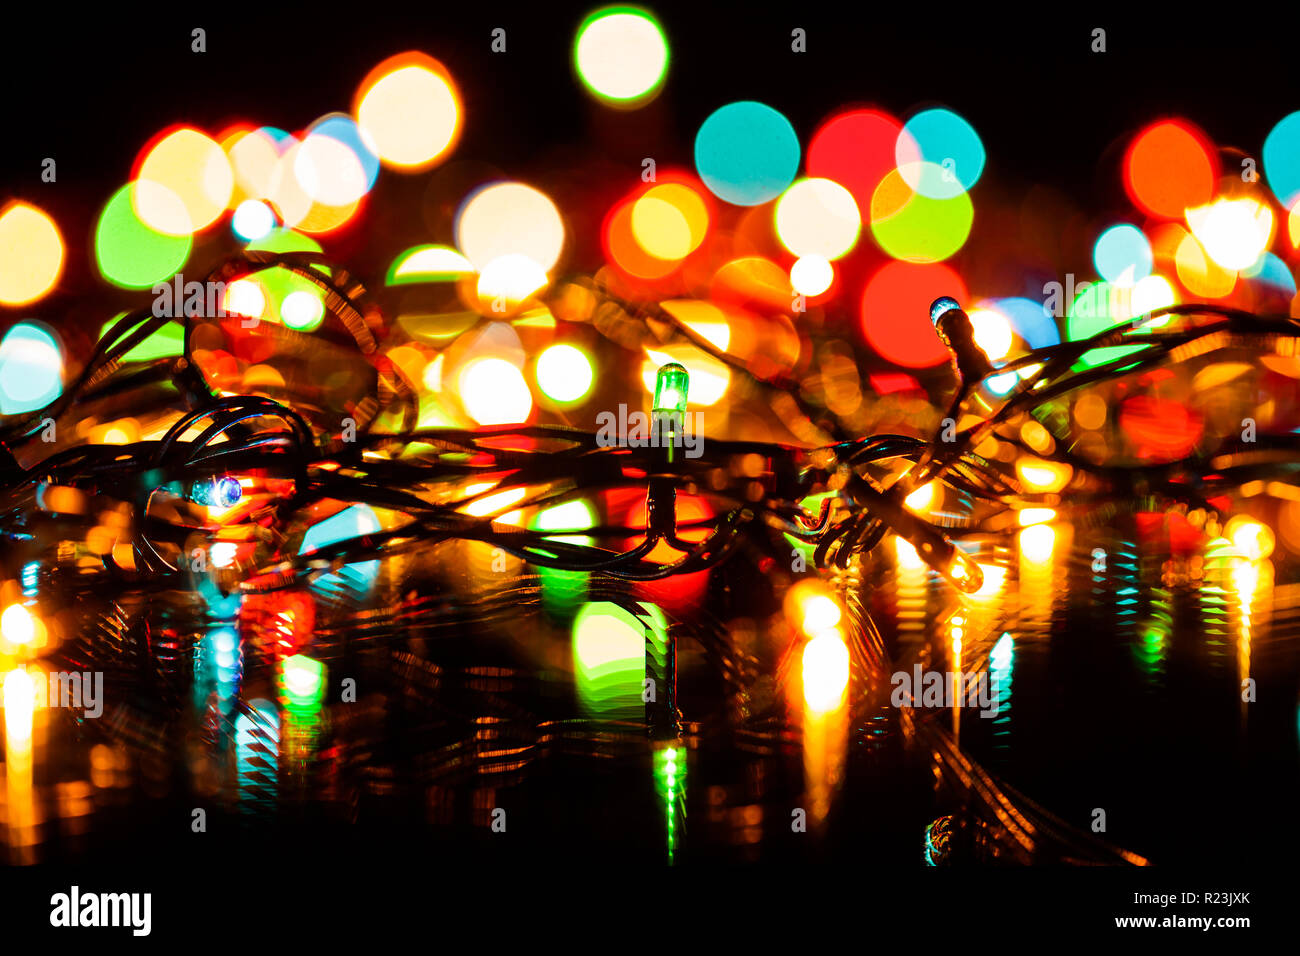 Blurred christmas or fairy lights christmas decoration background, focus on  electric light bulbs Stock Photo - Alamy